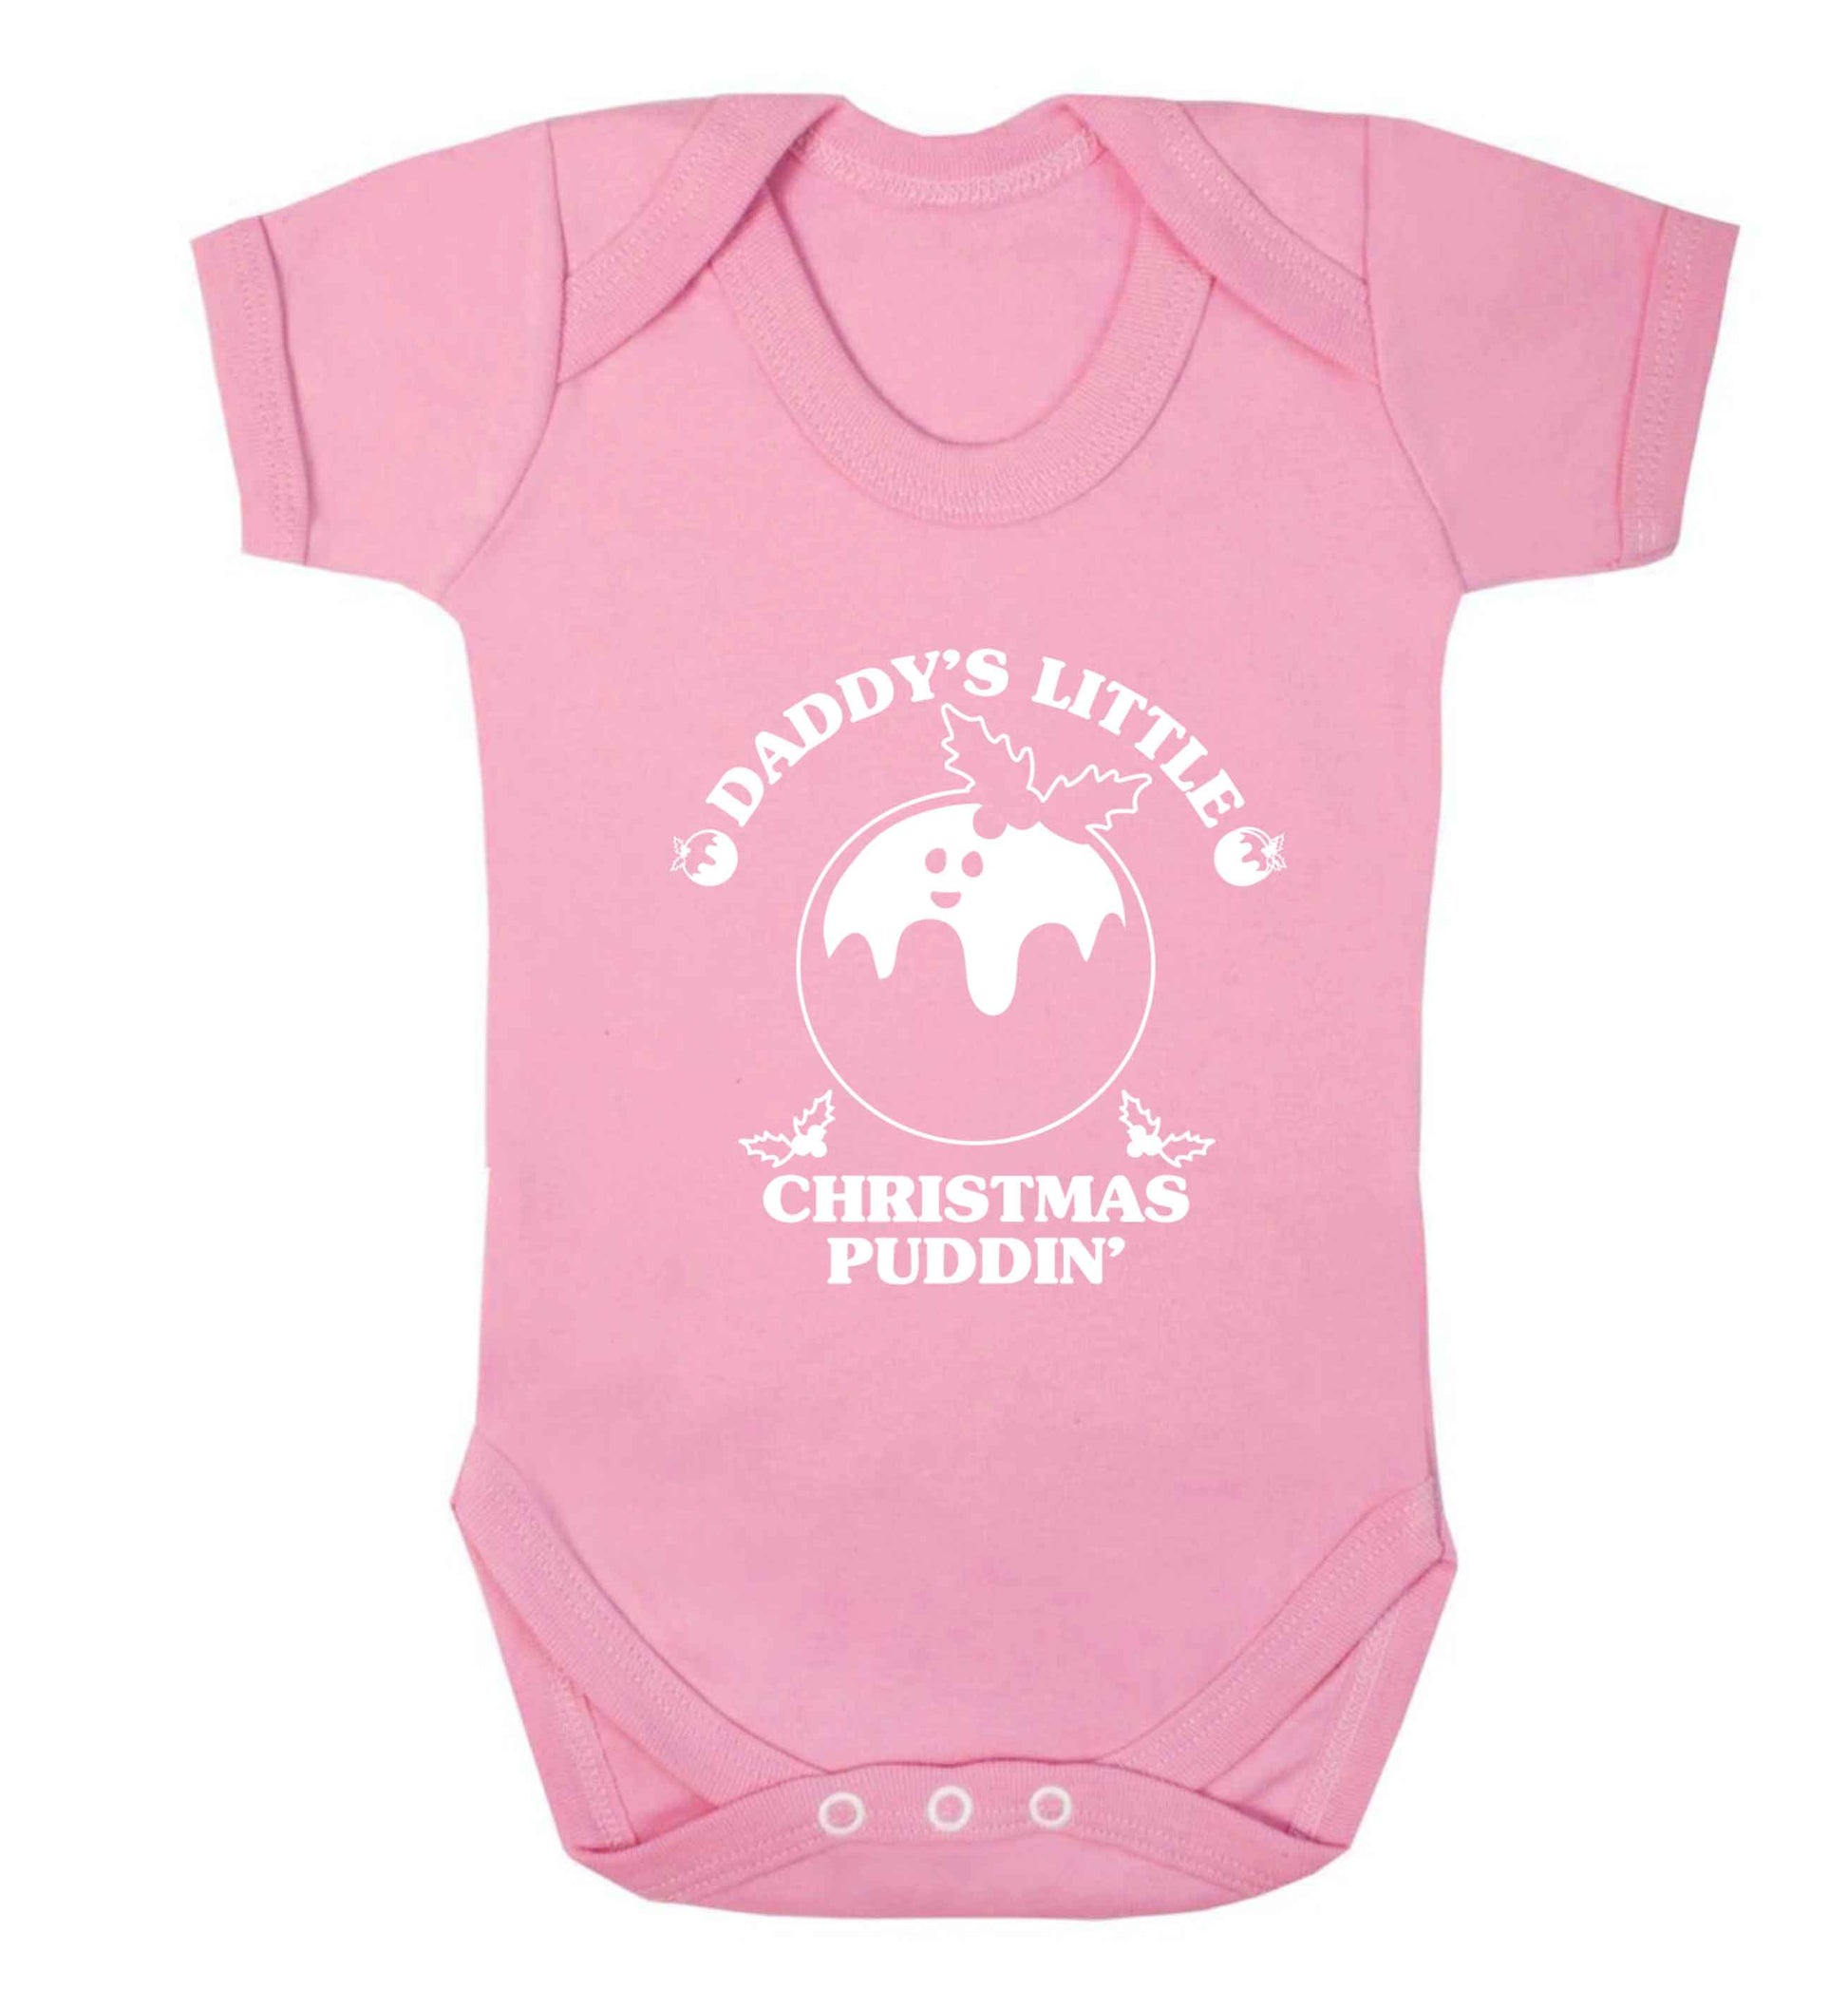 Daddy's little Christmas puddin' Baby Vest pale pink 18-24 months